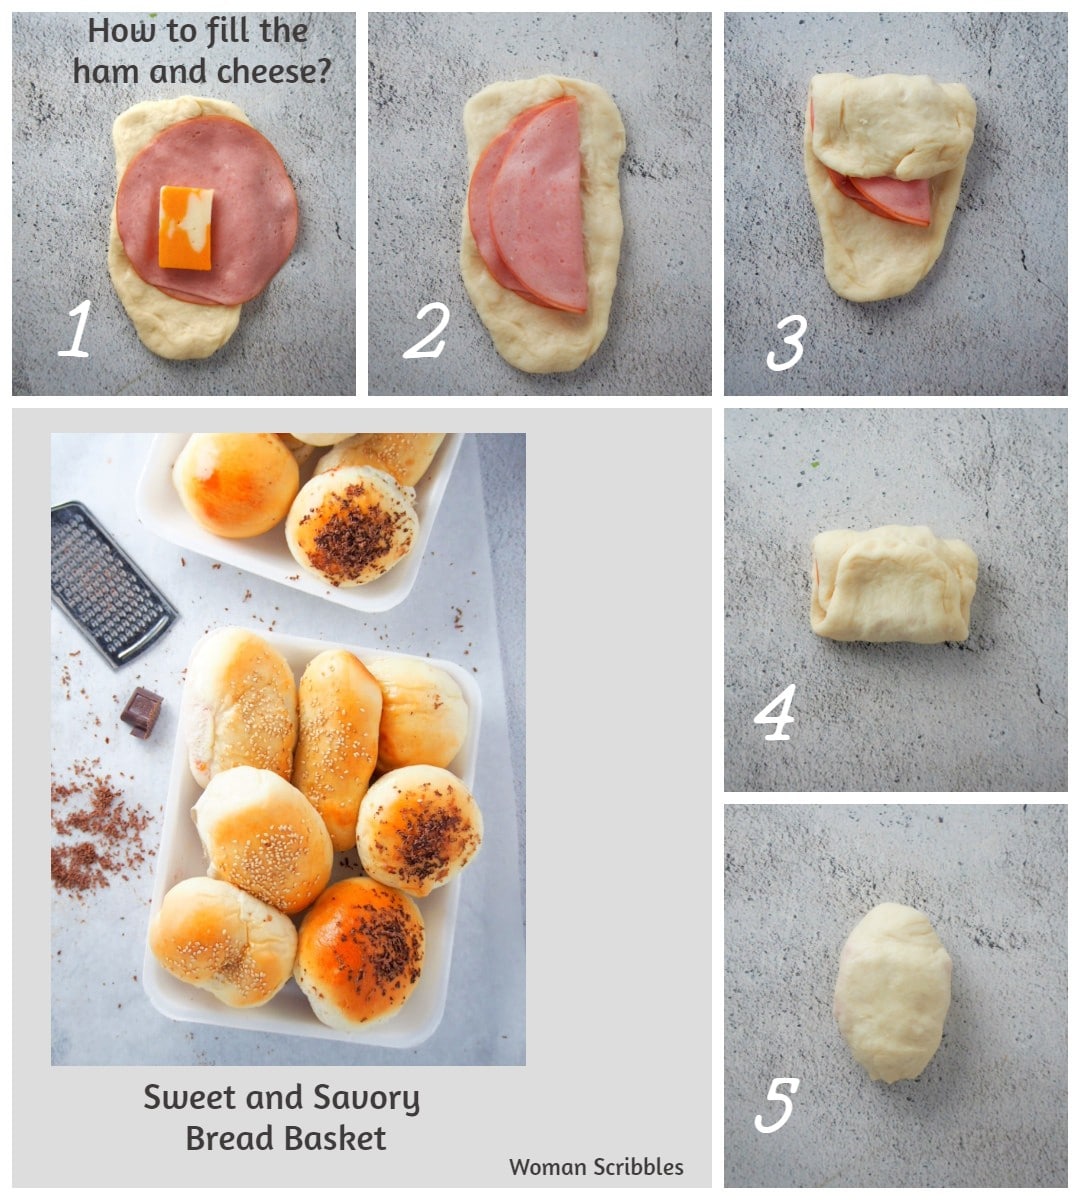 A collage showing how to fill the ham and cheese buns for the assorted bread basket.